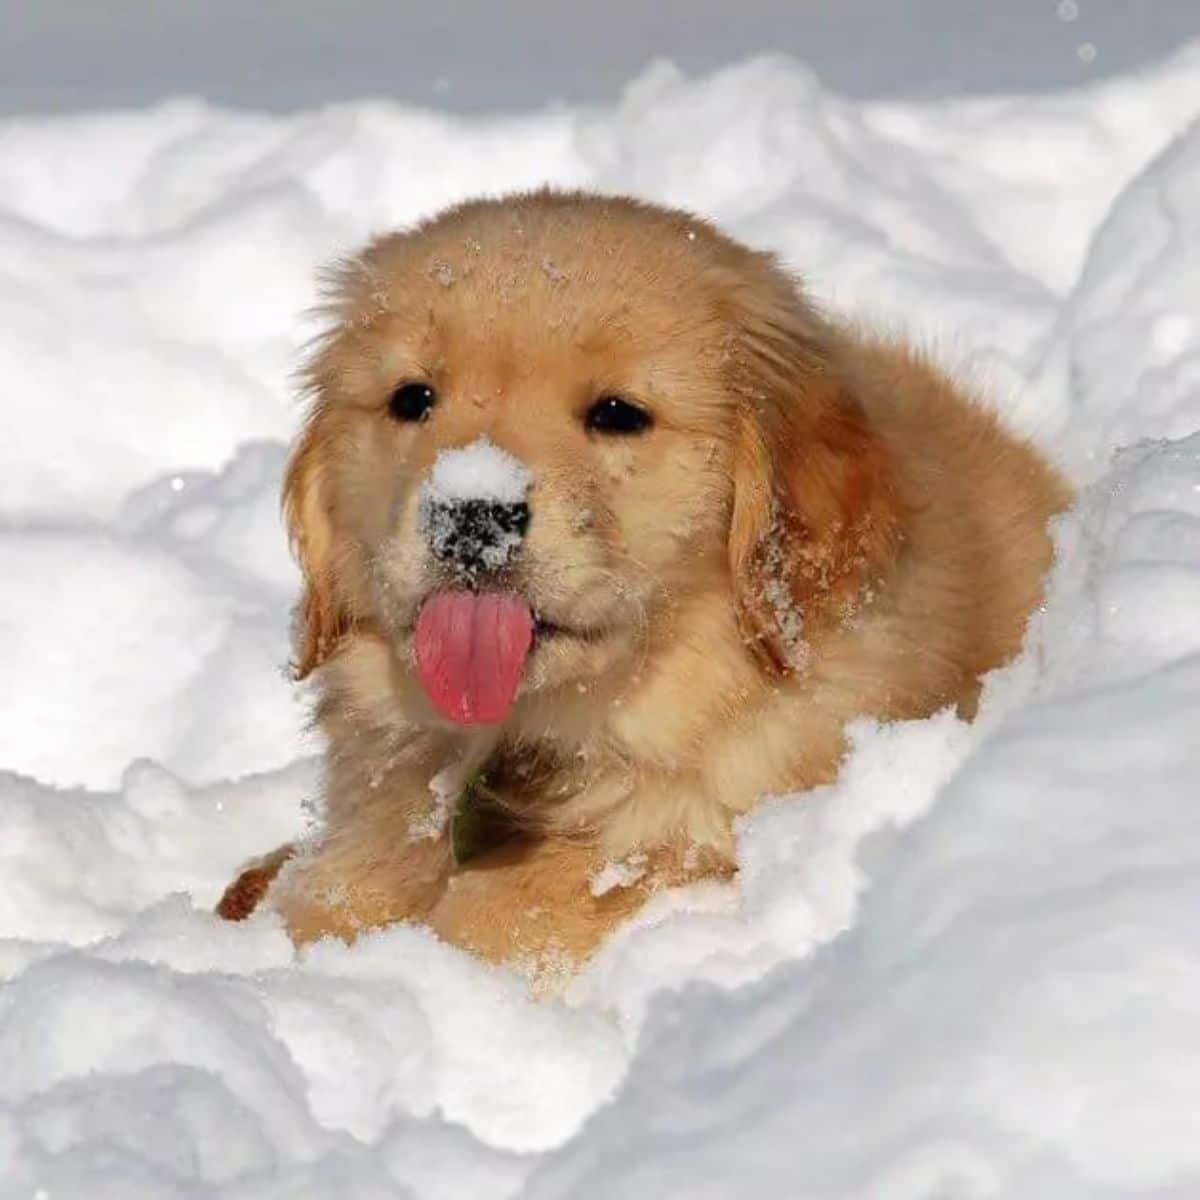 golden retriever puppy laying on snow with the tongue hanging out and some snow on its nose